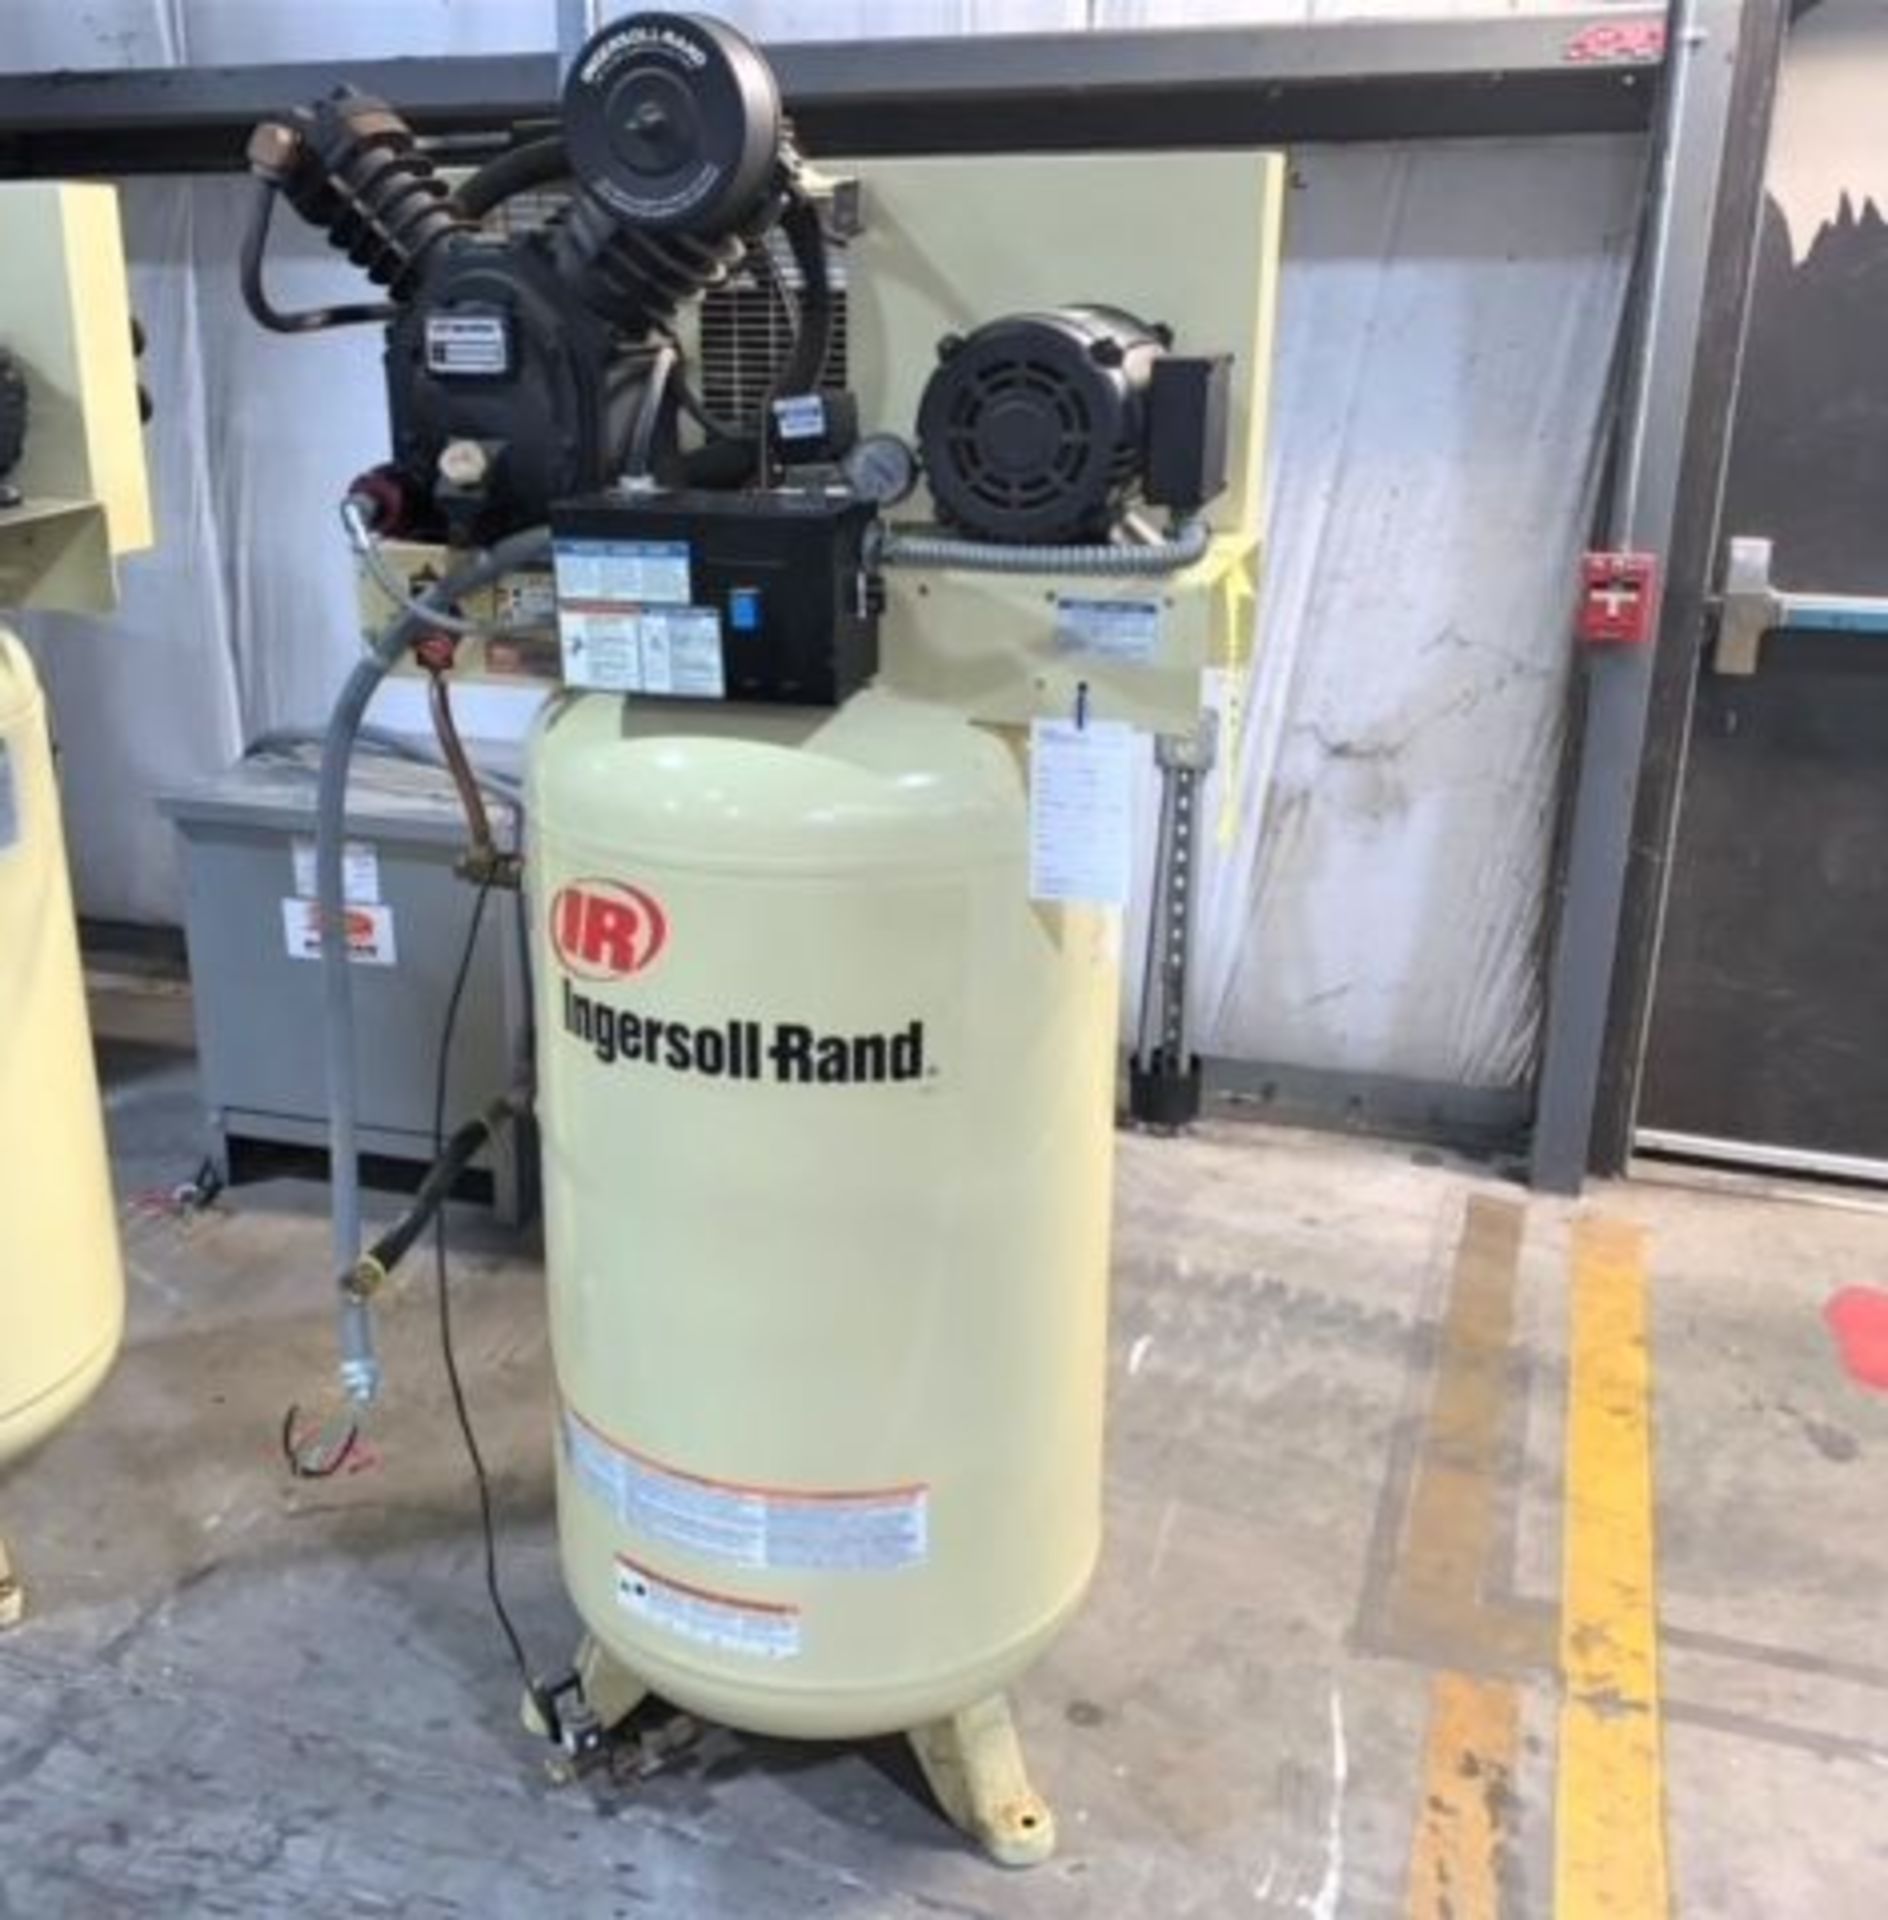 Ingersoll Rand Mdl. 2475N7.5 PSG Reciprocating 2-Stage Air Compressor, 7.5 HP